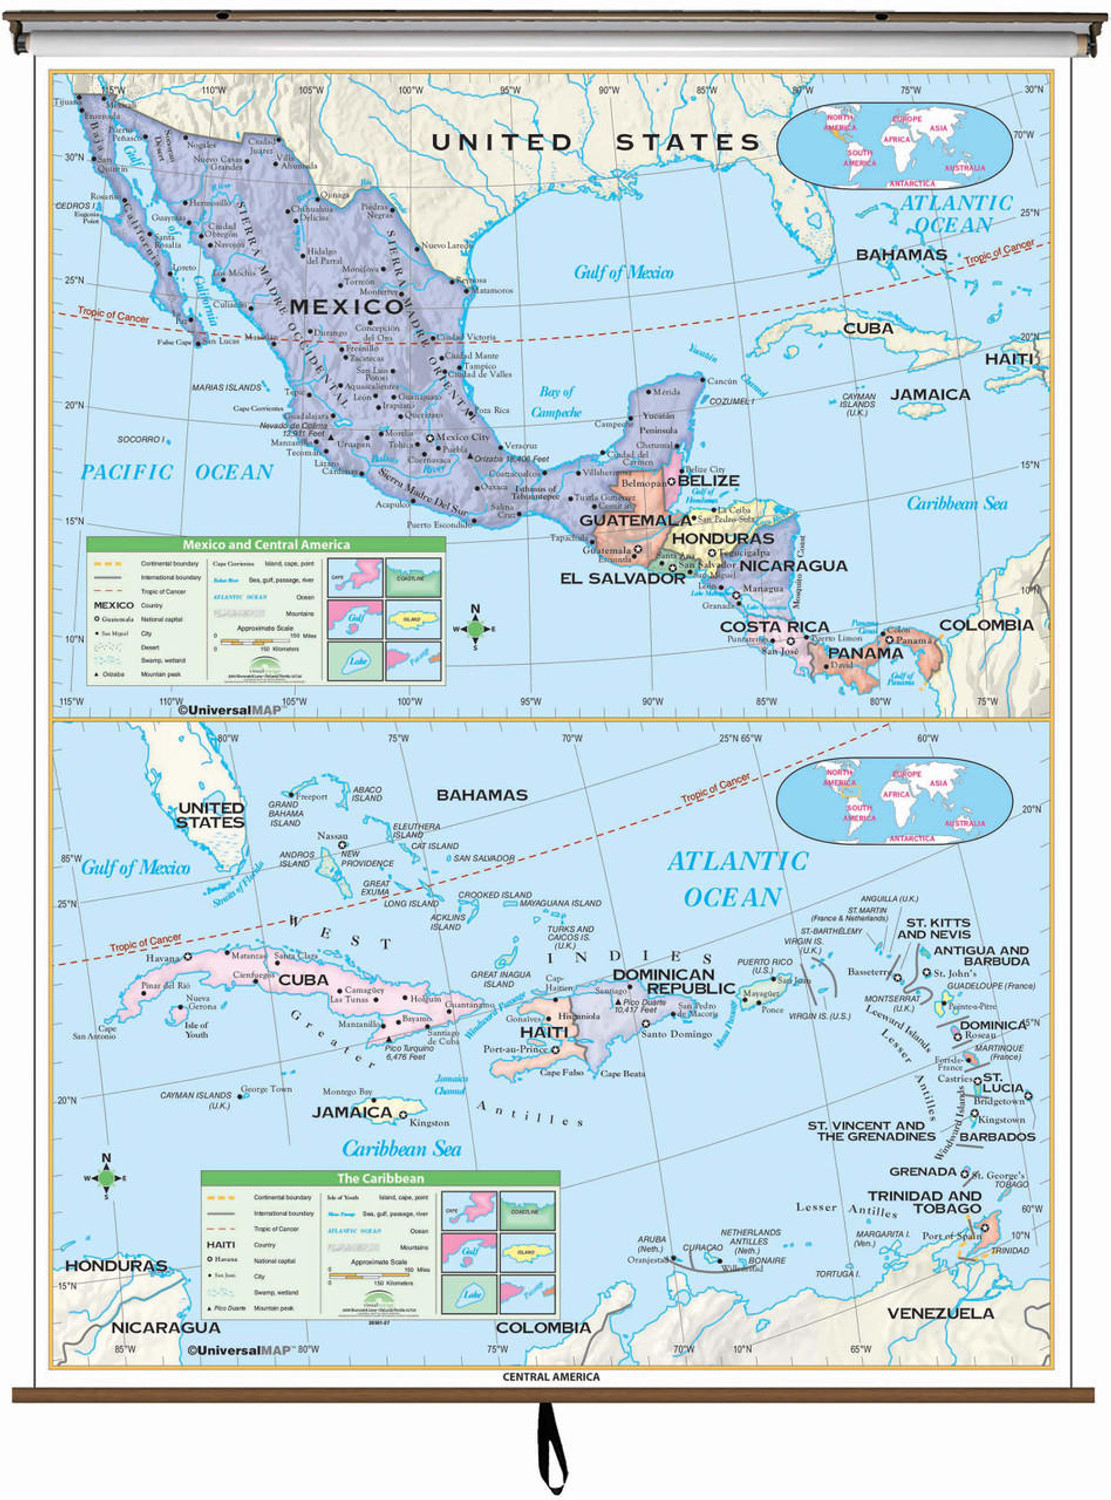 Essential Central America & Caribbean Map on Spring Roller, image 1, World Maps Online